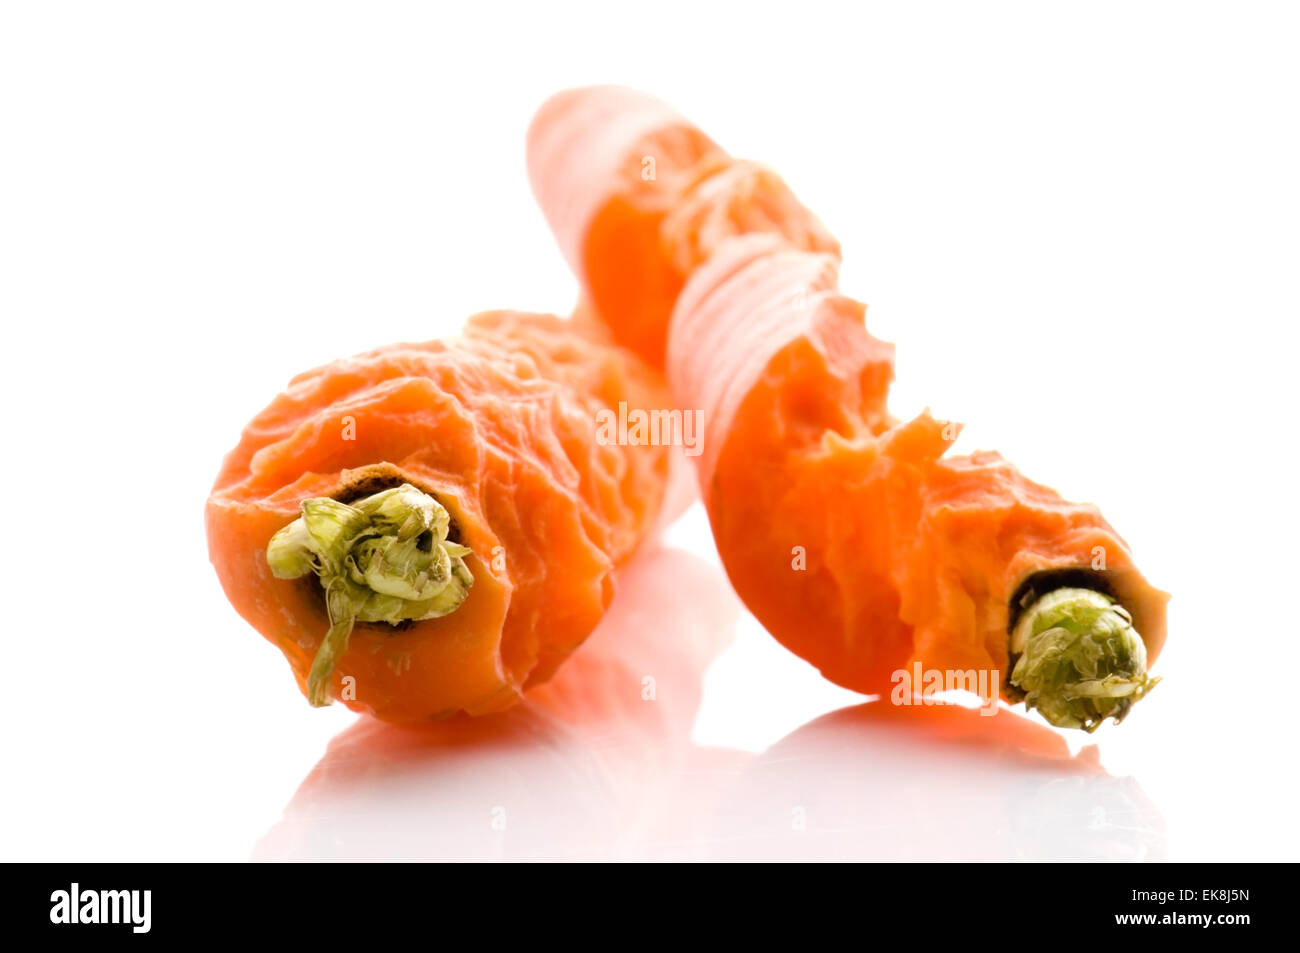 Bite out of a fresh carrot Stock Photo